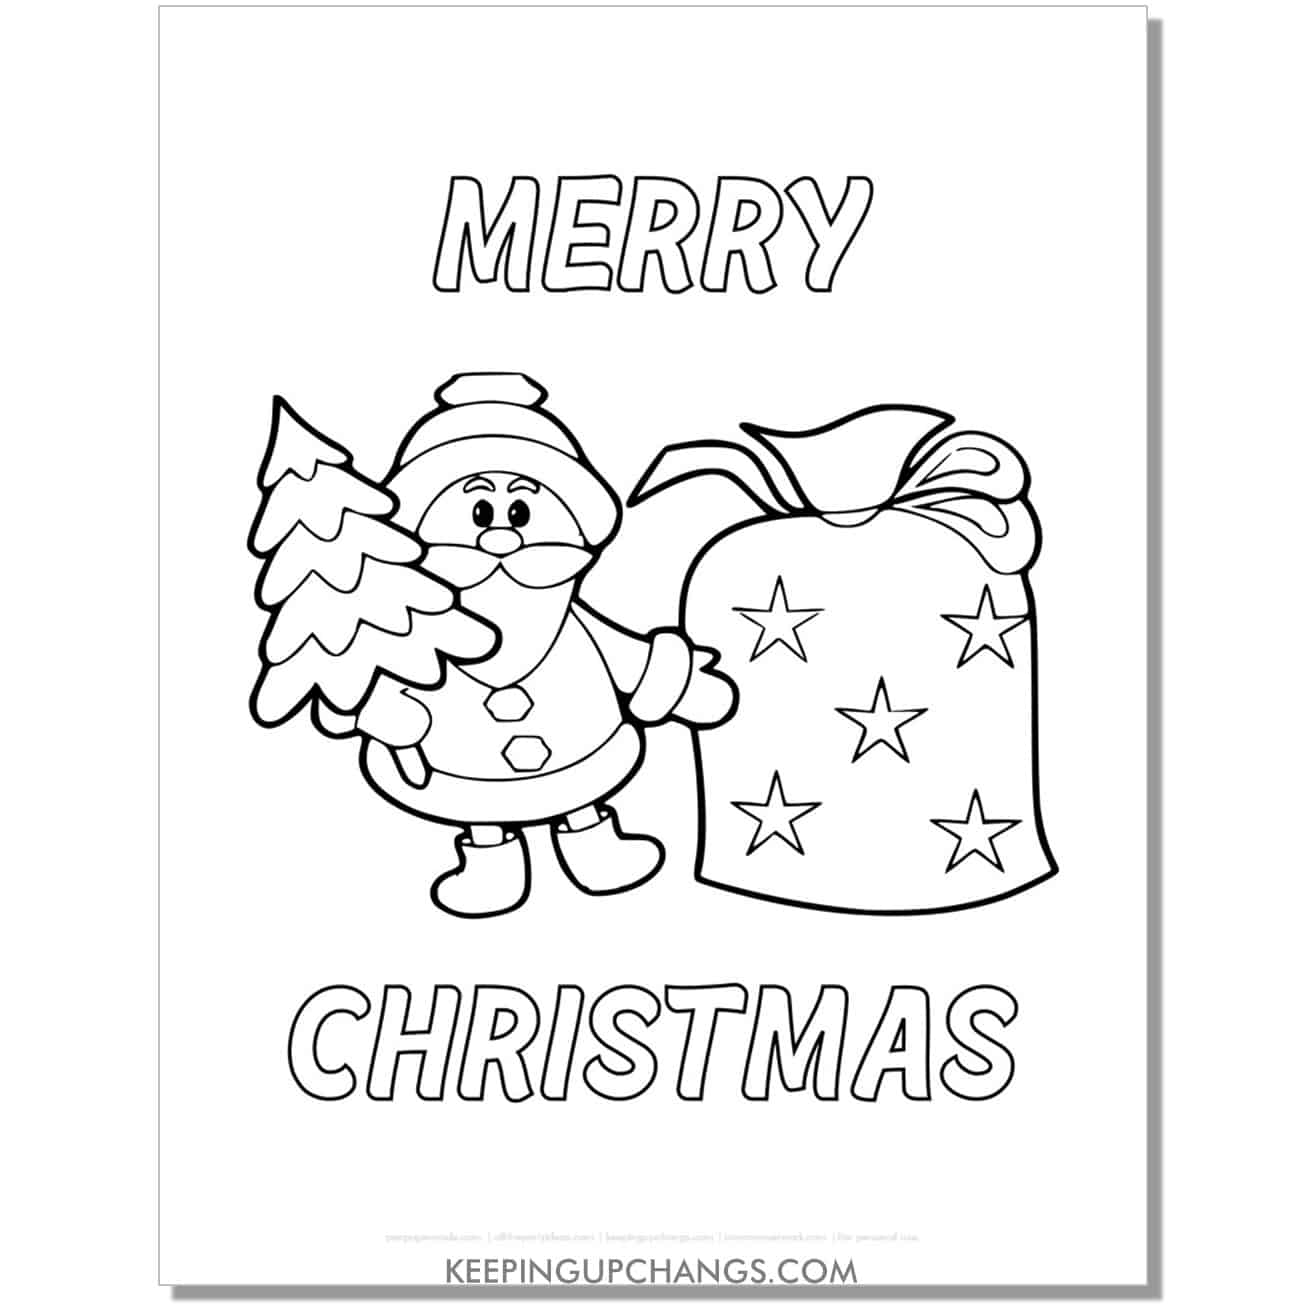 free merry christmas santa with tree, sack coloring page.